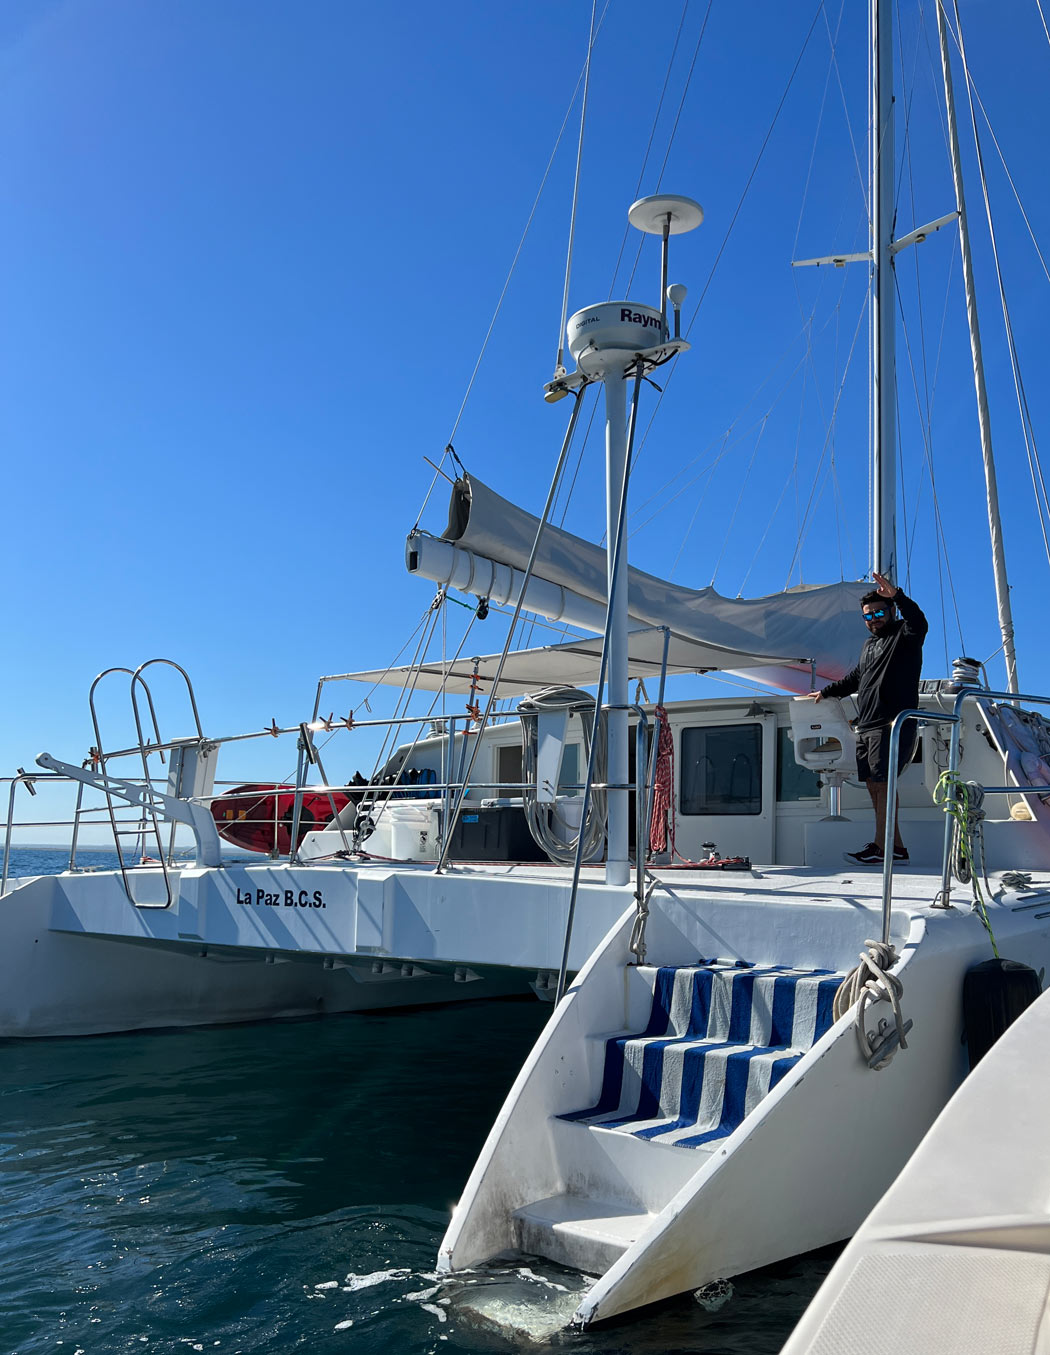 The Island Cat is a comfortable catamaran, used by Baja Charters as a support boat on their La Paz whale shark tours.